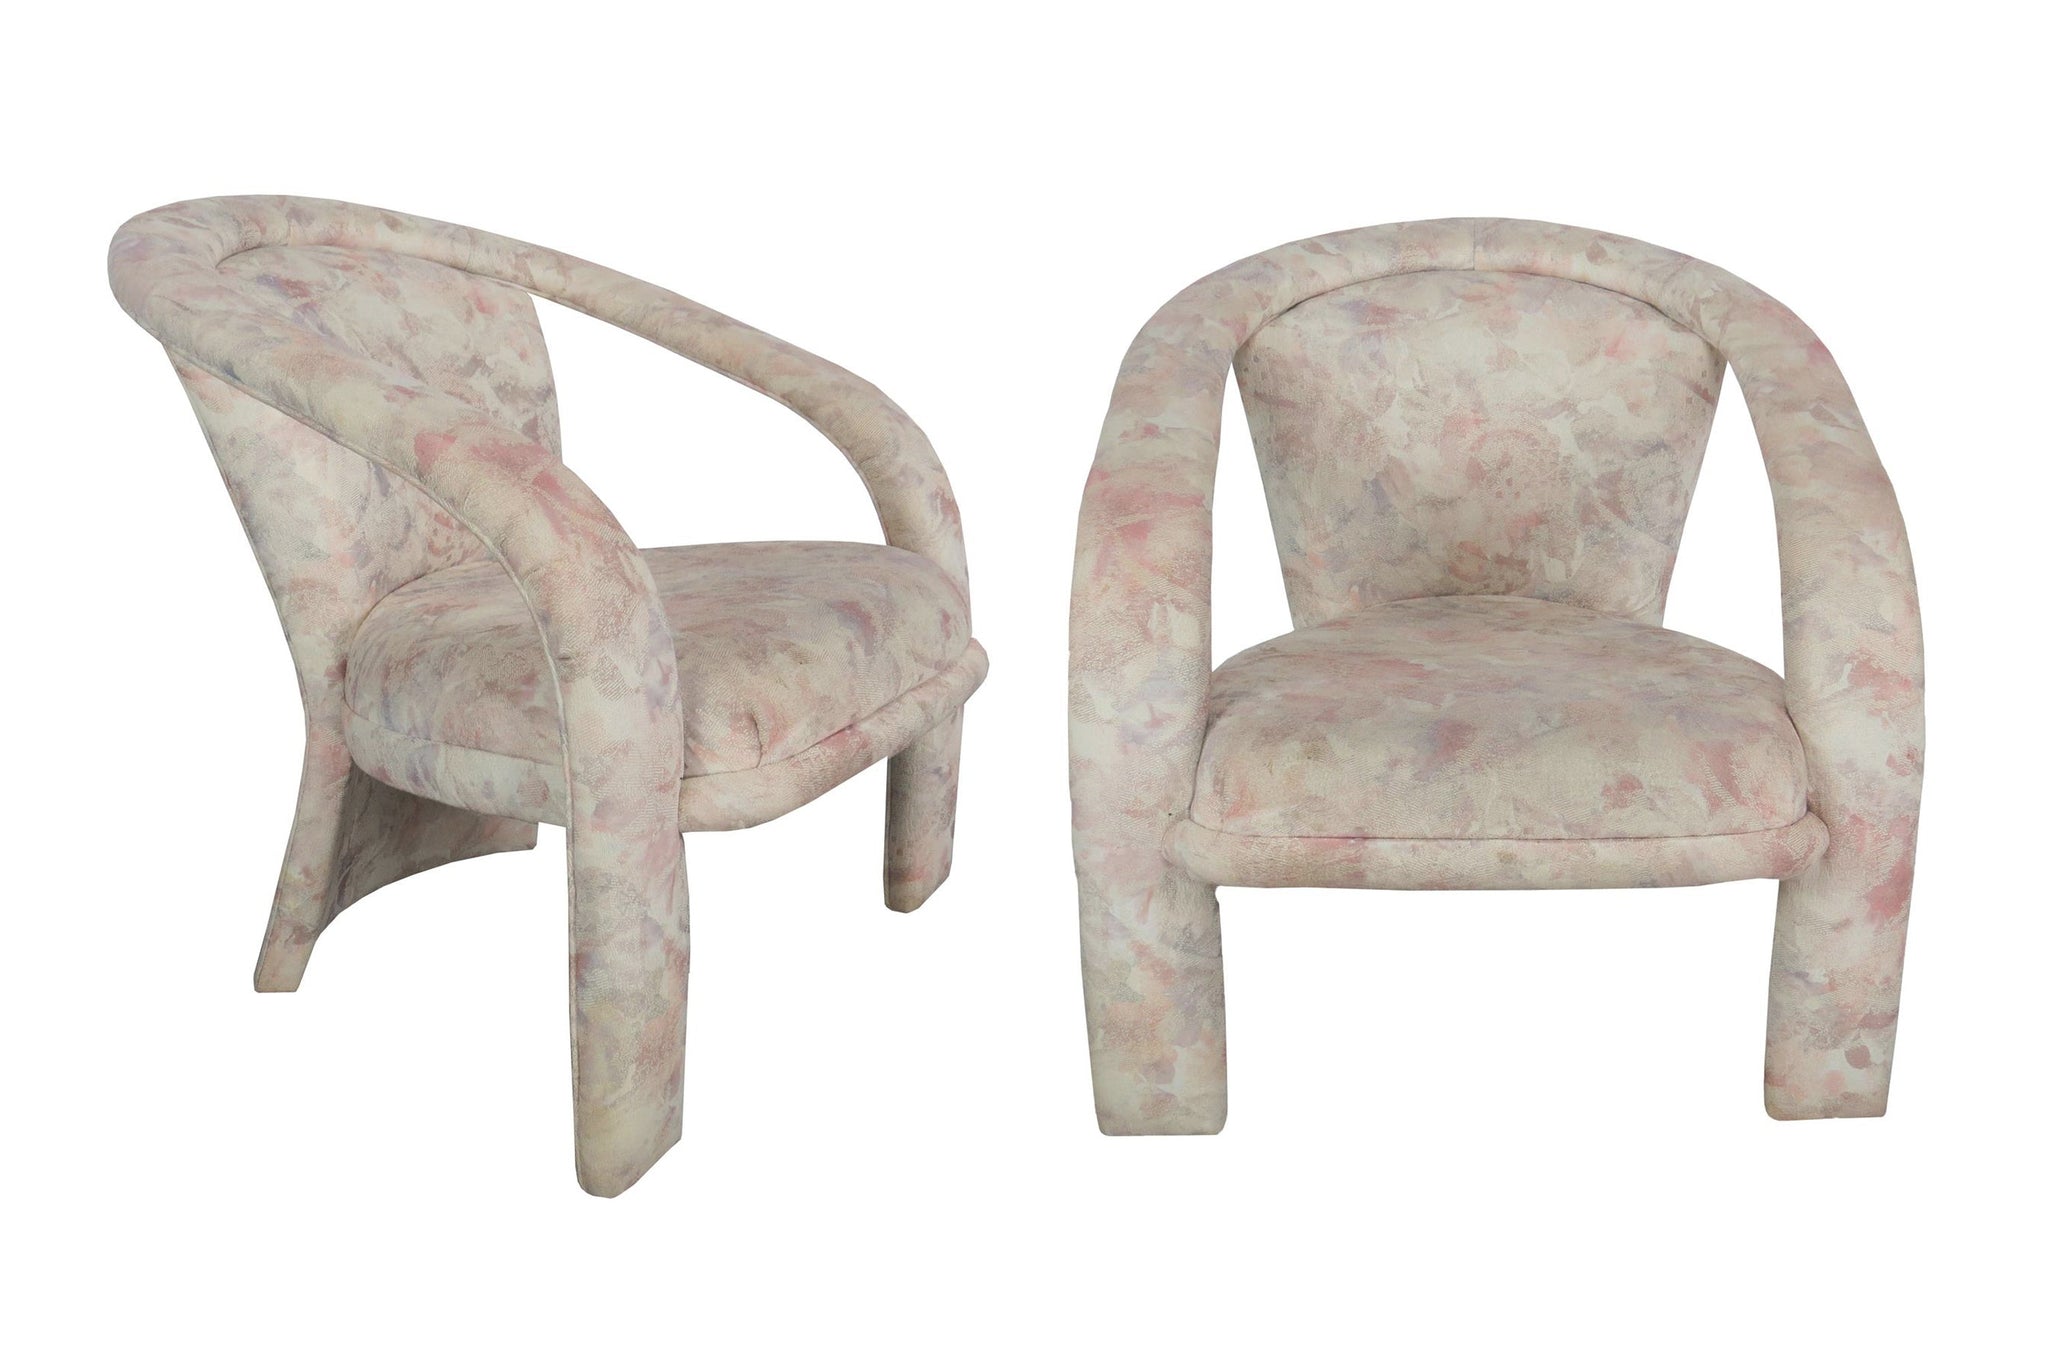 edgebrookhouse Vintage 1980s Postmodern Carsons Pop Lounge Chairs With Pastel Floral Fabric - a Pair